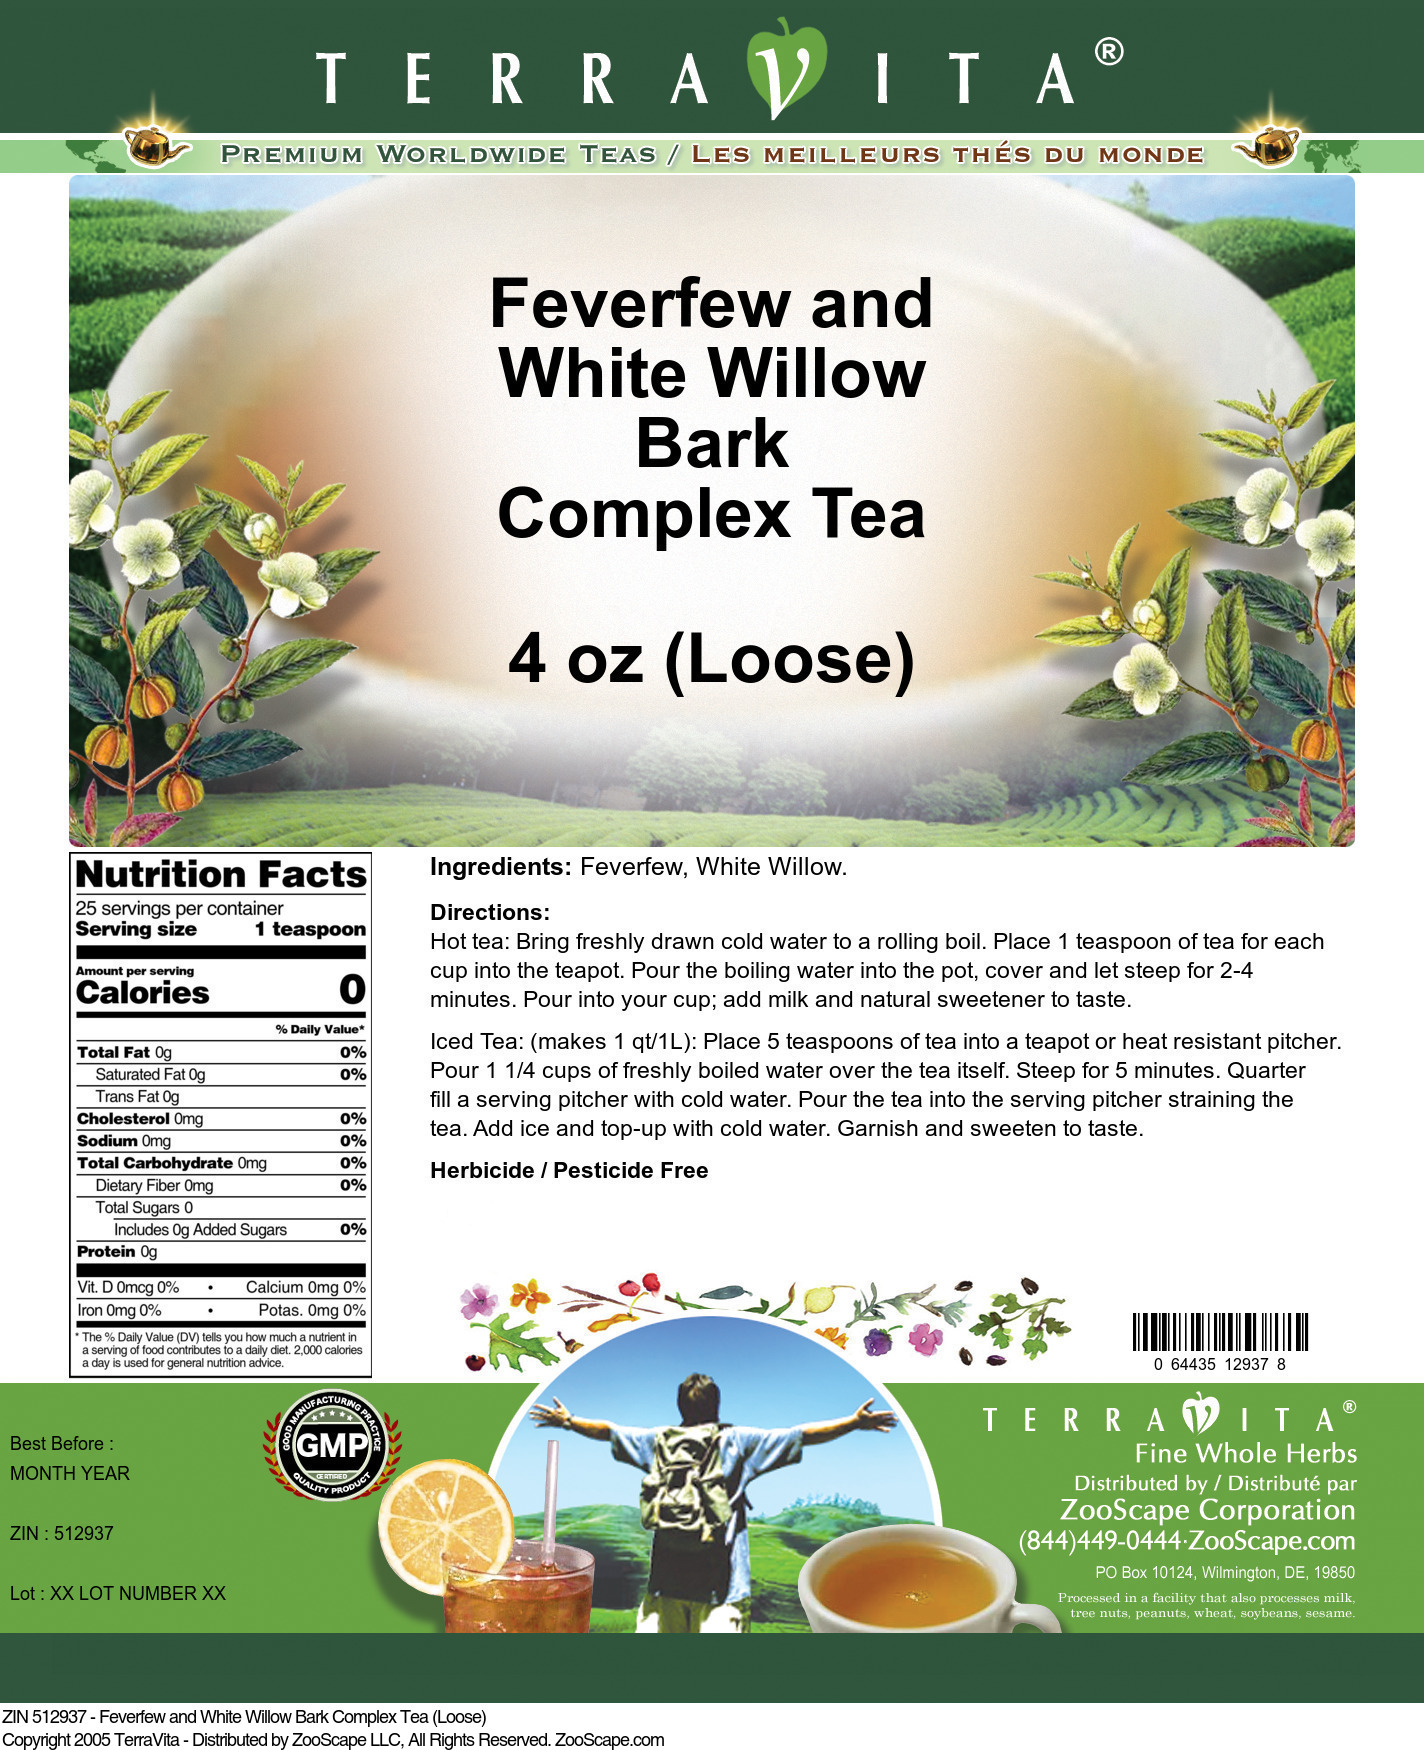 Feverfew and White Willow Bark Complex Tea (Loose) - Label